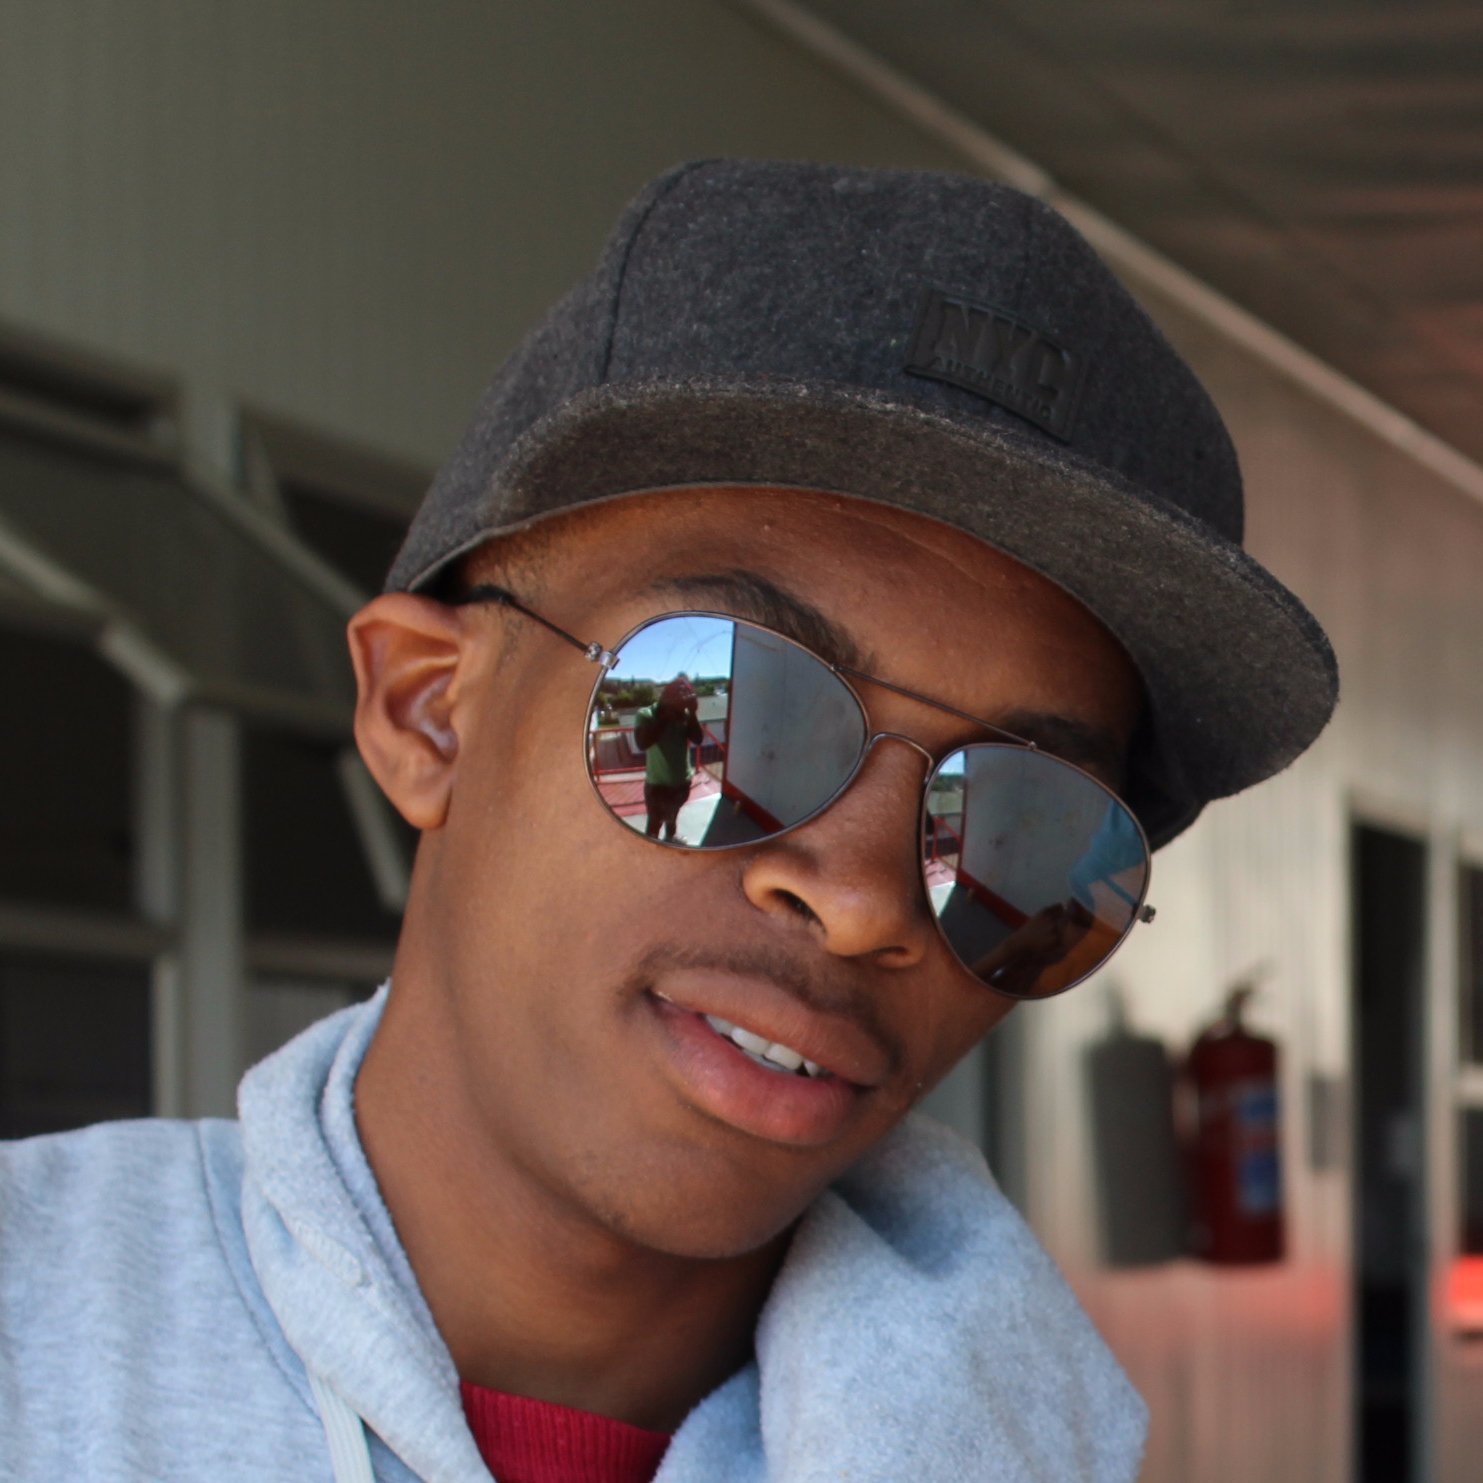 My name is Mahonane Andrew Maepho.
Andrew Maepho is a 3rd year student at Limkokwing
University of Creative Technology
studying Graphic Design. I loved art at t